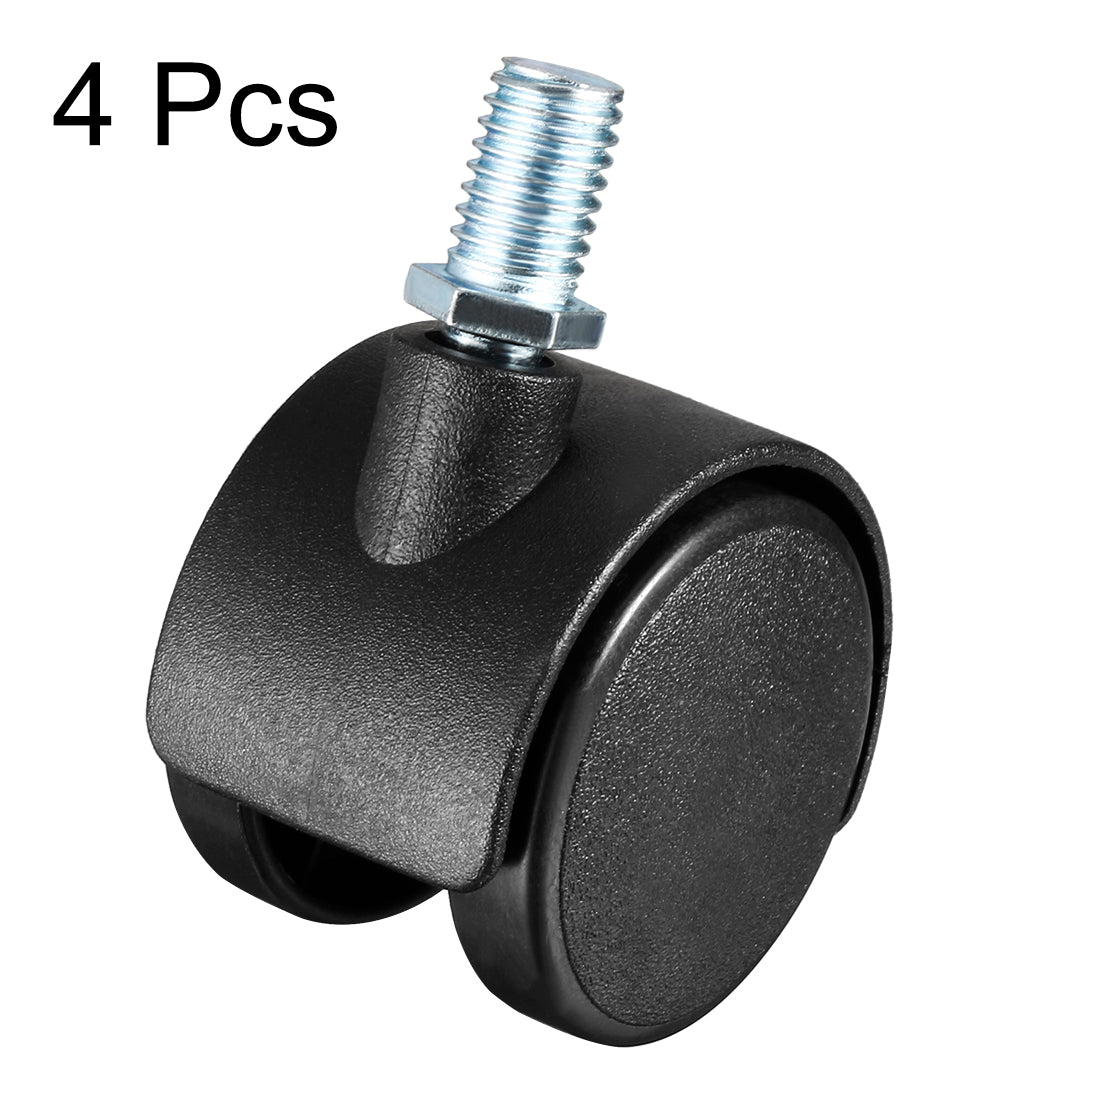 Uxcell Uxcell Swivel Casters 1.45 Inch Nylon 360 Degree M8 x 13mm Threaded Caster Wheels for Furniture Chair , 4 Pcs